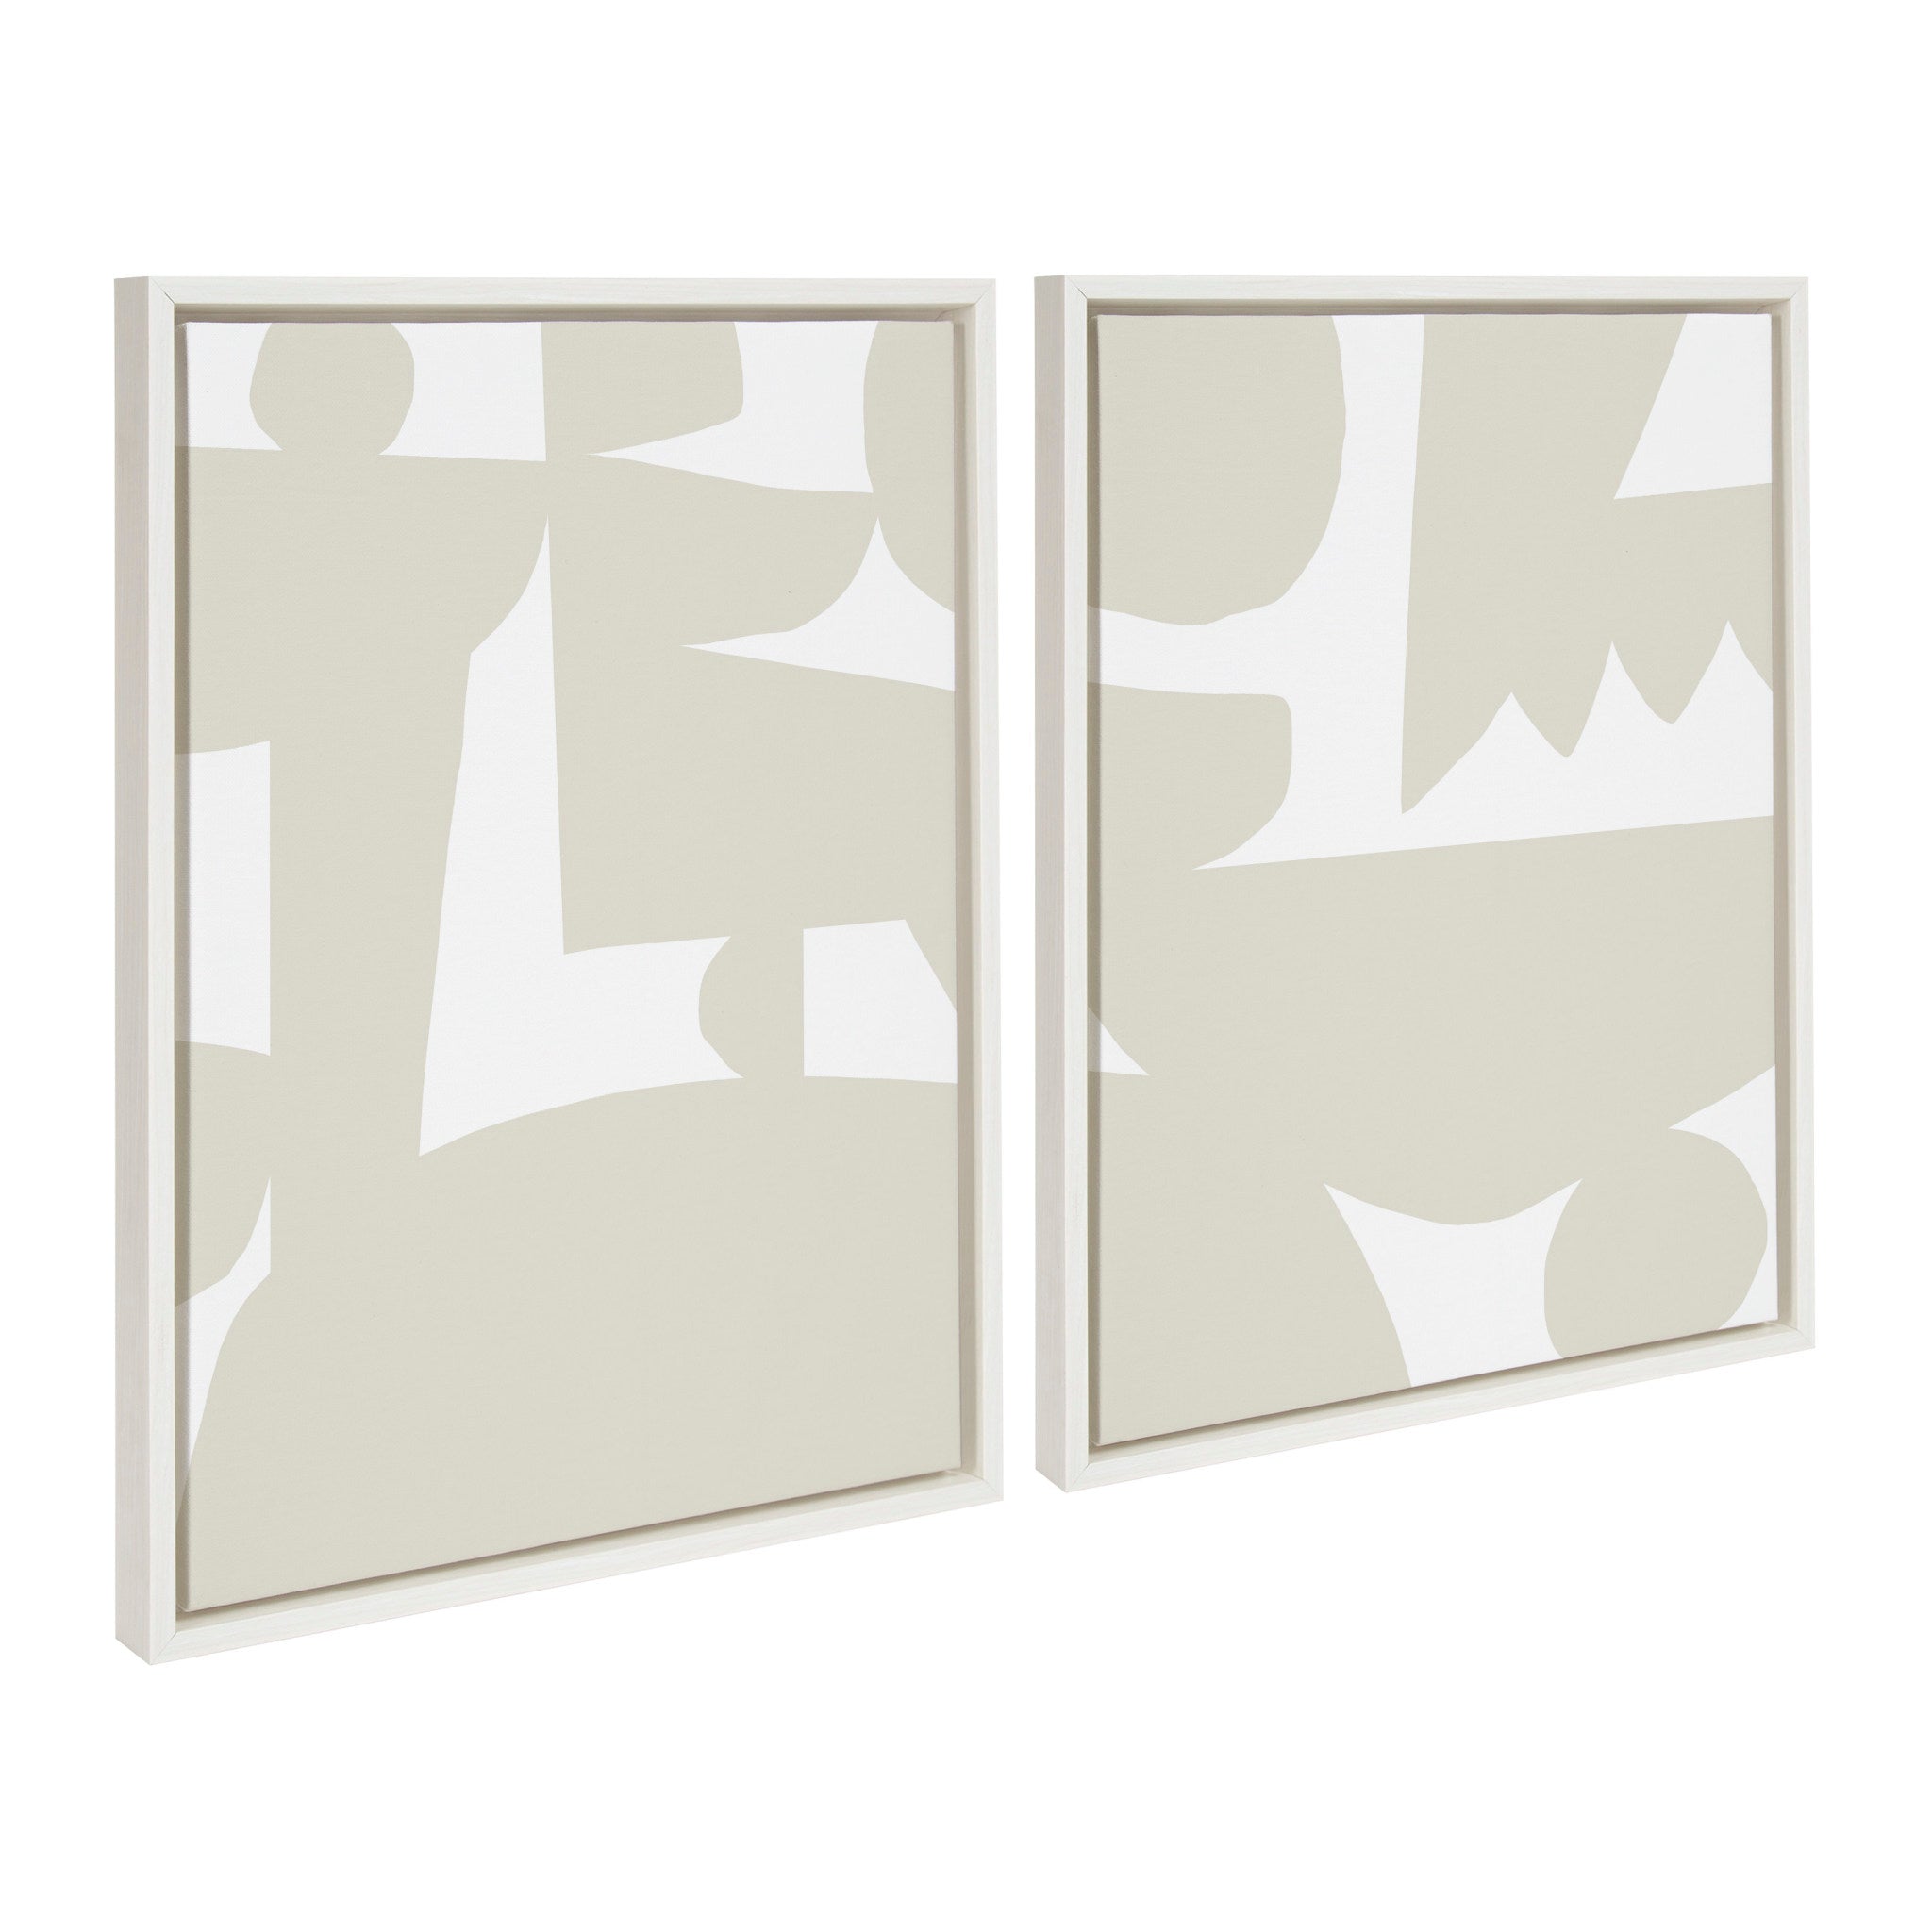 Sylvie Quiet Jungle 1 left and Right Neutral Abstract Framed Canvas by Kelly Knaga